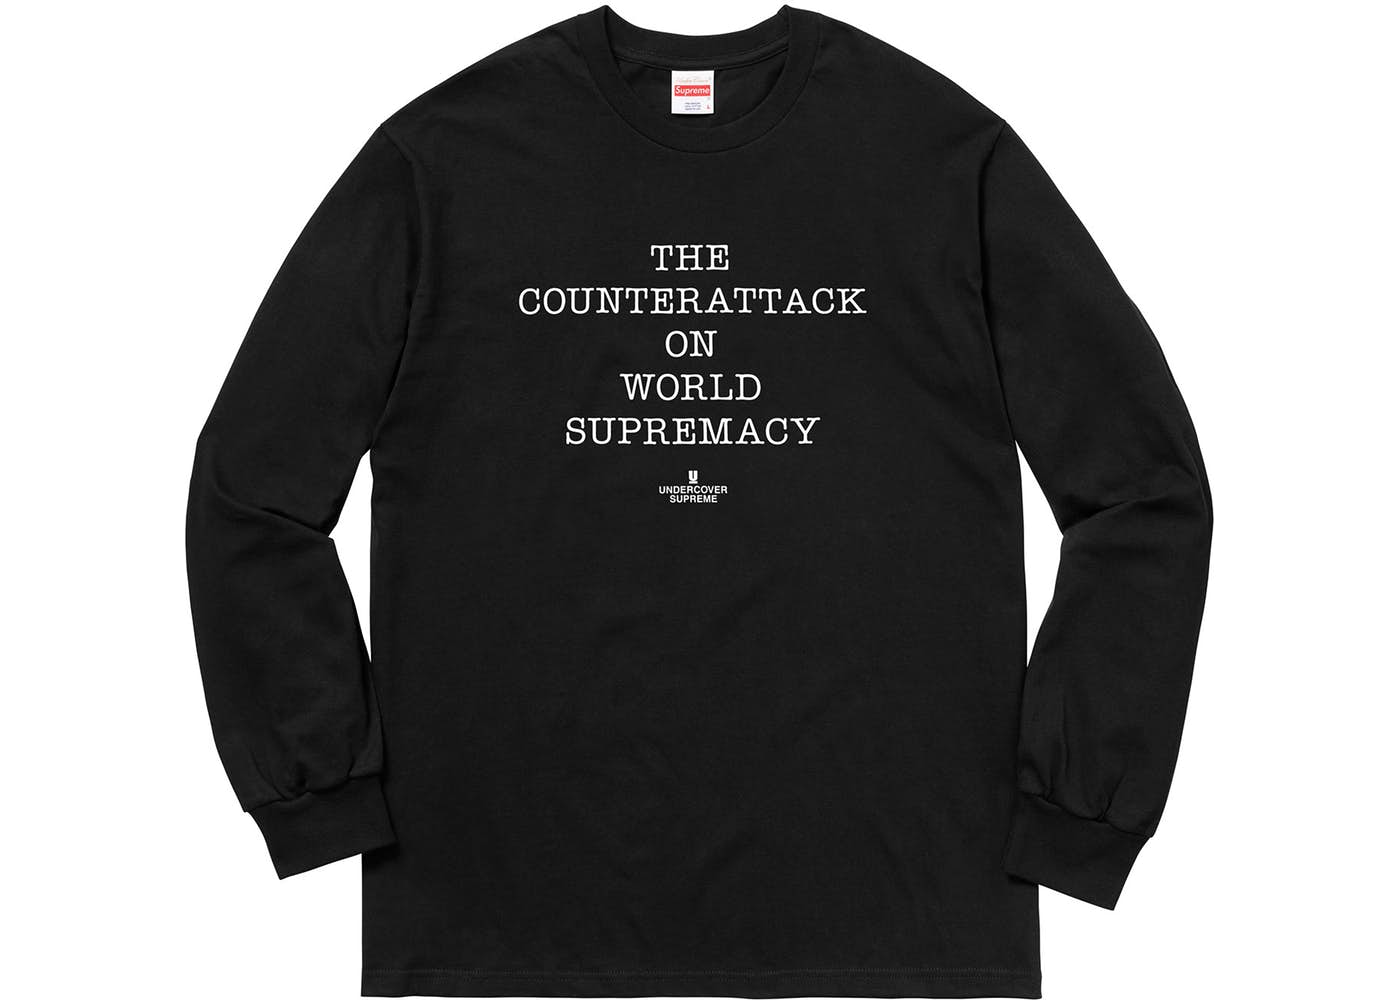 Supreme UNDERCOVER/Public Enemy Counterattack Long Sleeve Tee Black